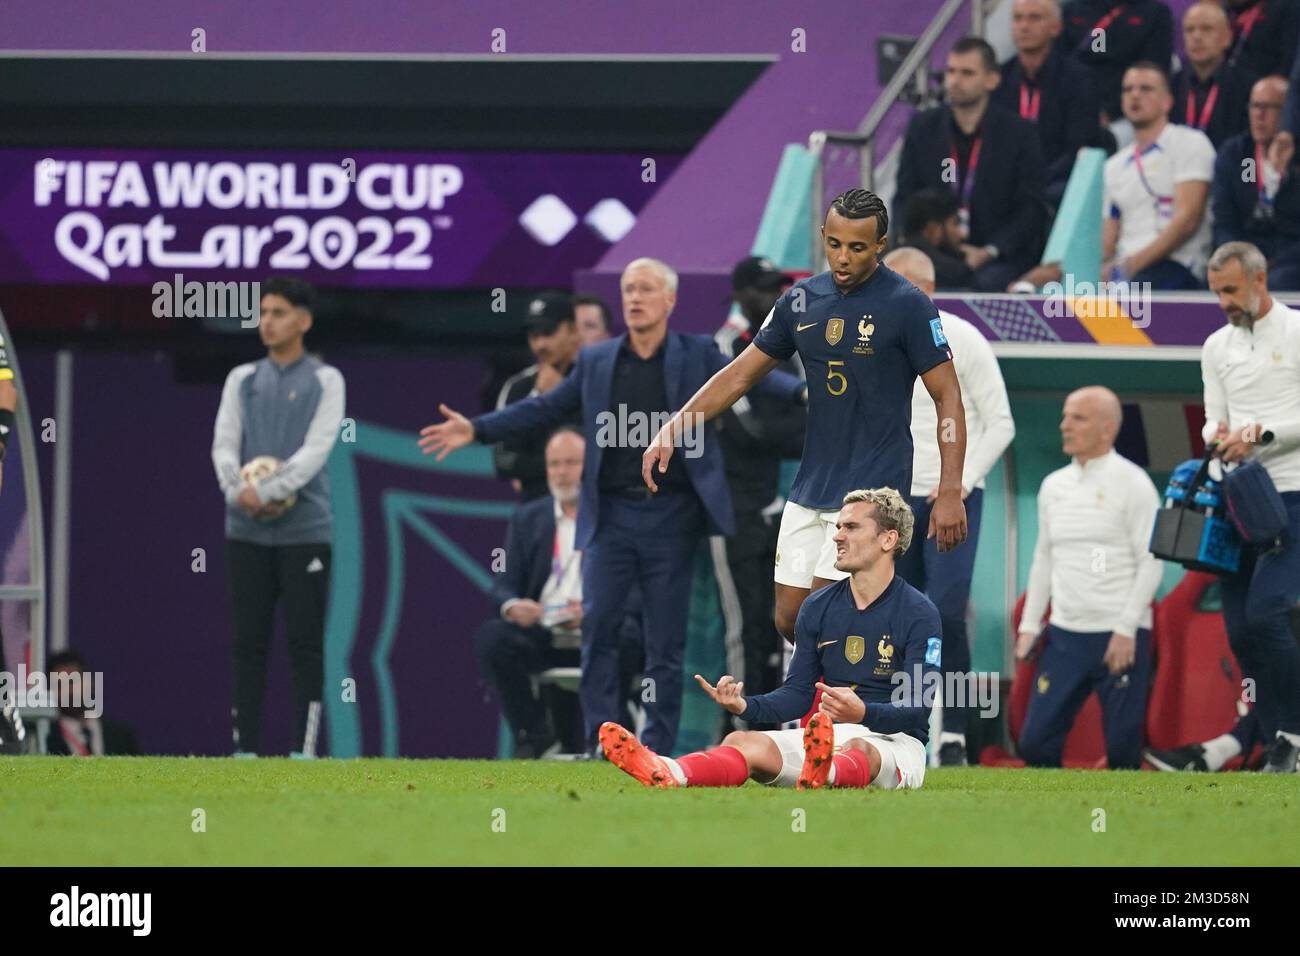 DOHA, QATAR - DECEMBER 14: Player of France Antoine Griezmann reacts during the FIFA World Cup Qatar 2022 Semi-finals match between France and Morocco at Al Bayt Stadium on December 14, 2022 in Al Khor, Qatar. (Photo by Florencia Tan Jun/PxImages) Credit: Px Images/Alamy Live News Stock Photo